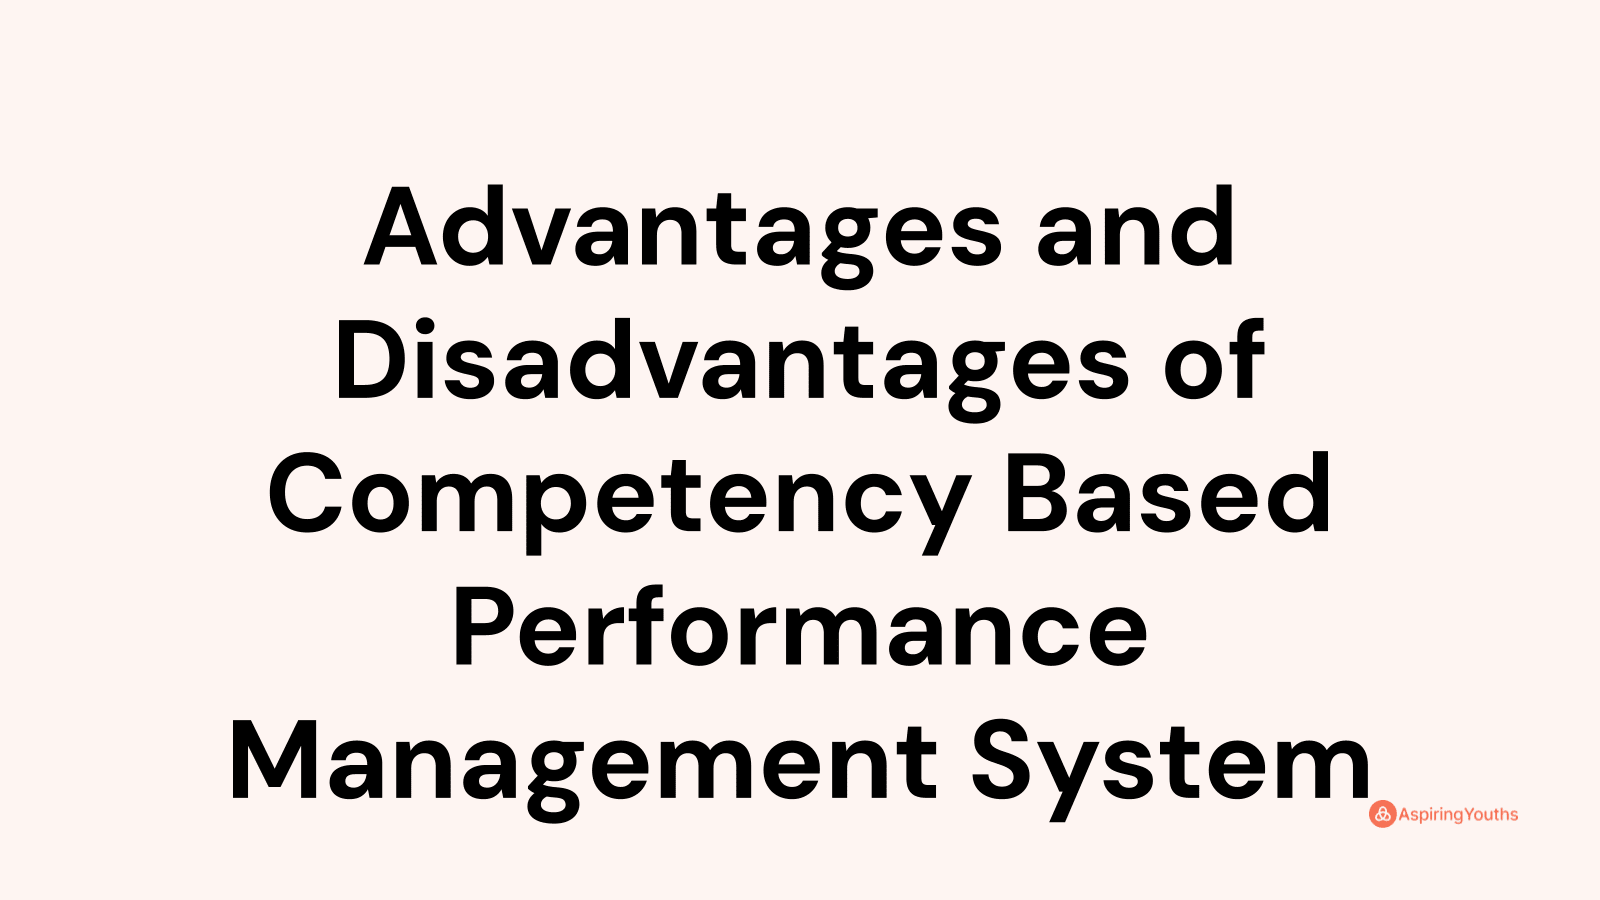 Advantages and disadvantages of Competency Based Performance Management System